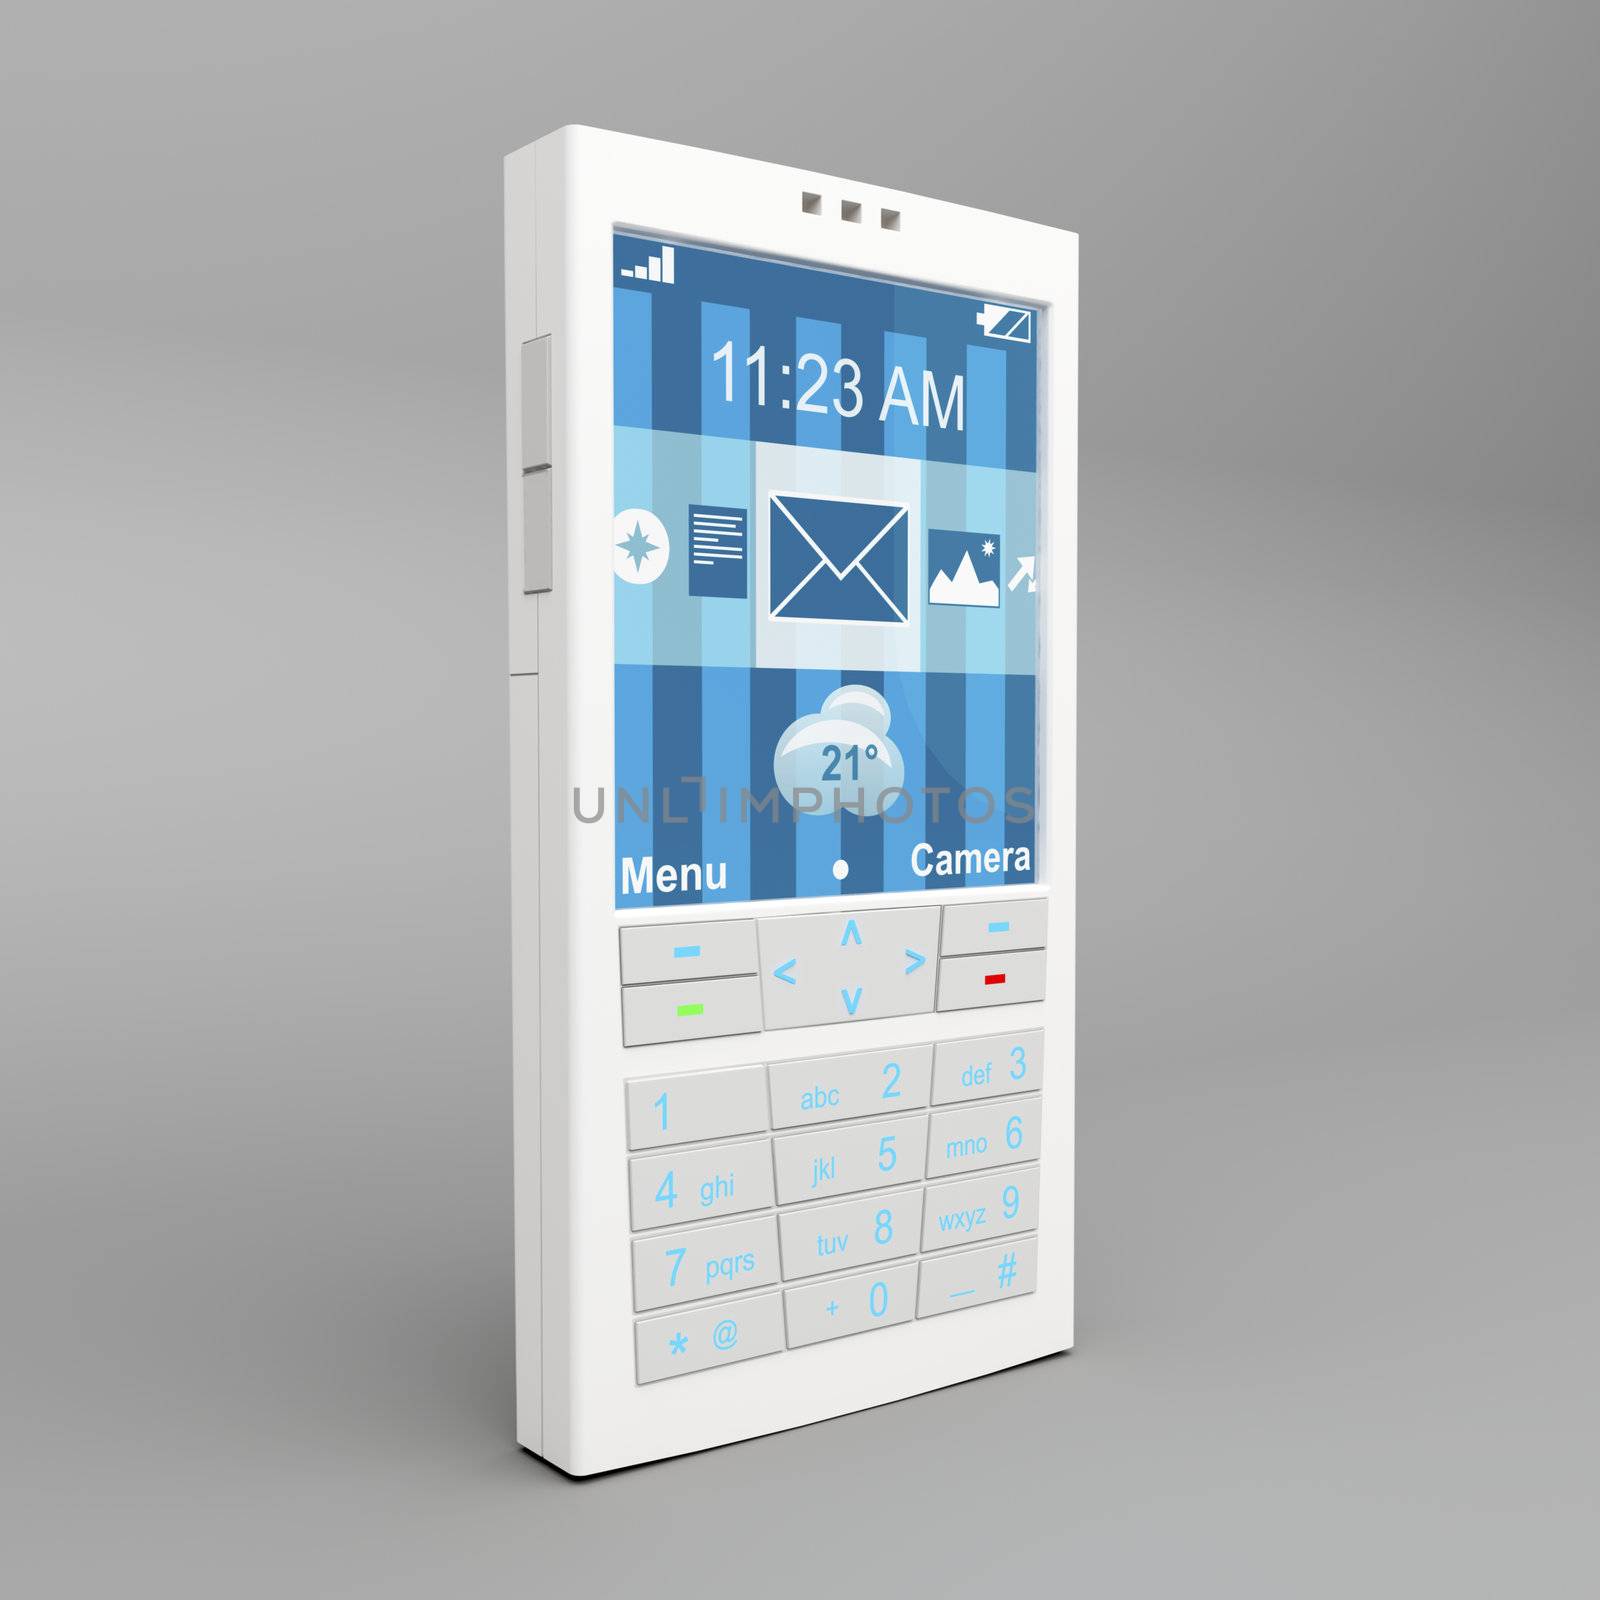 Mobile phone by magraphics